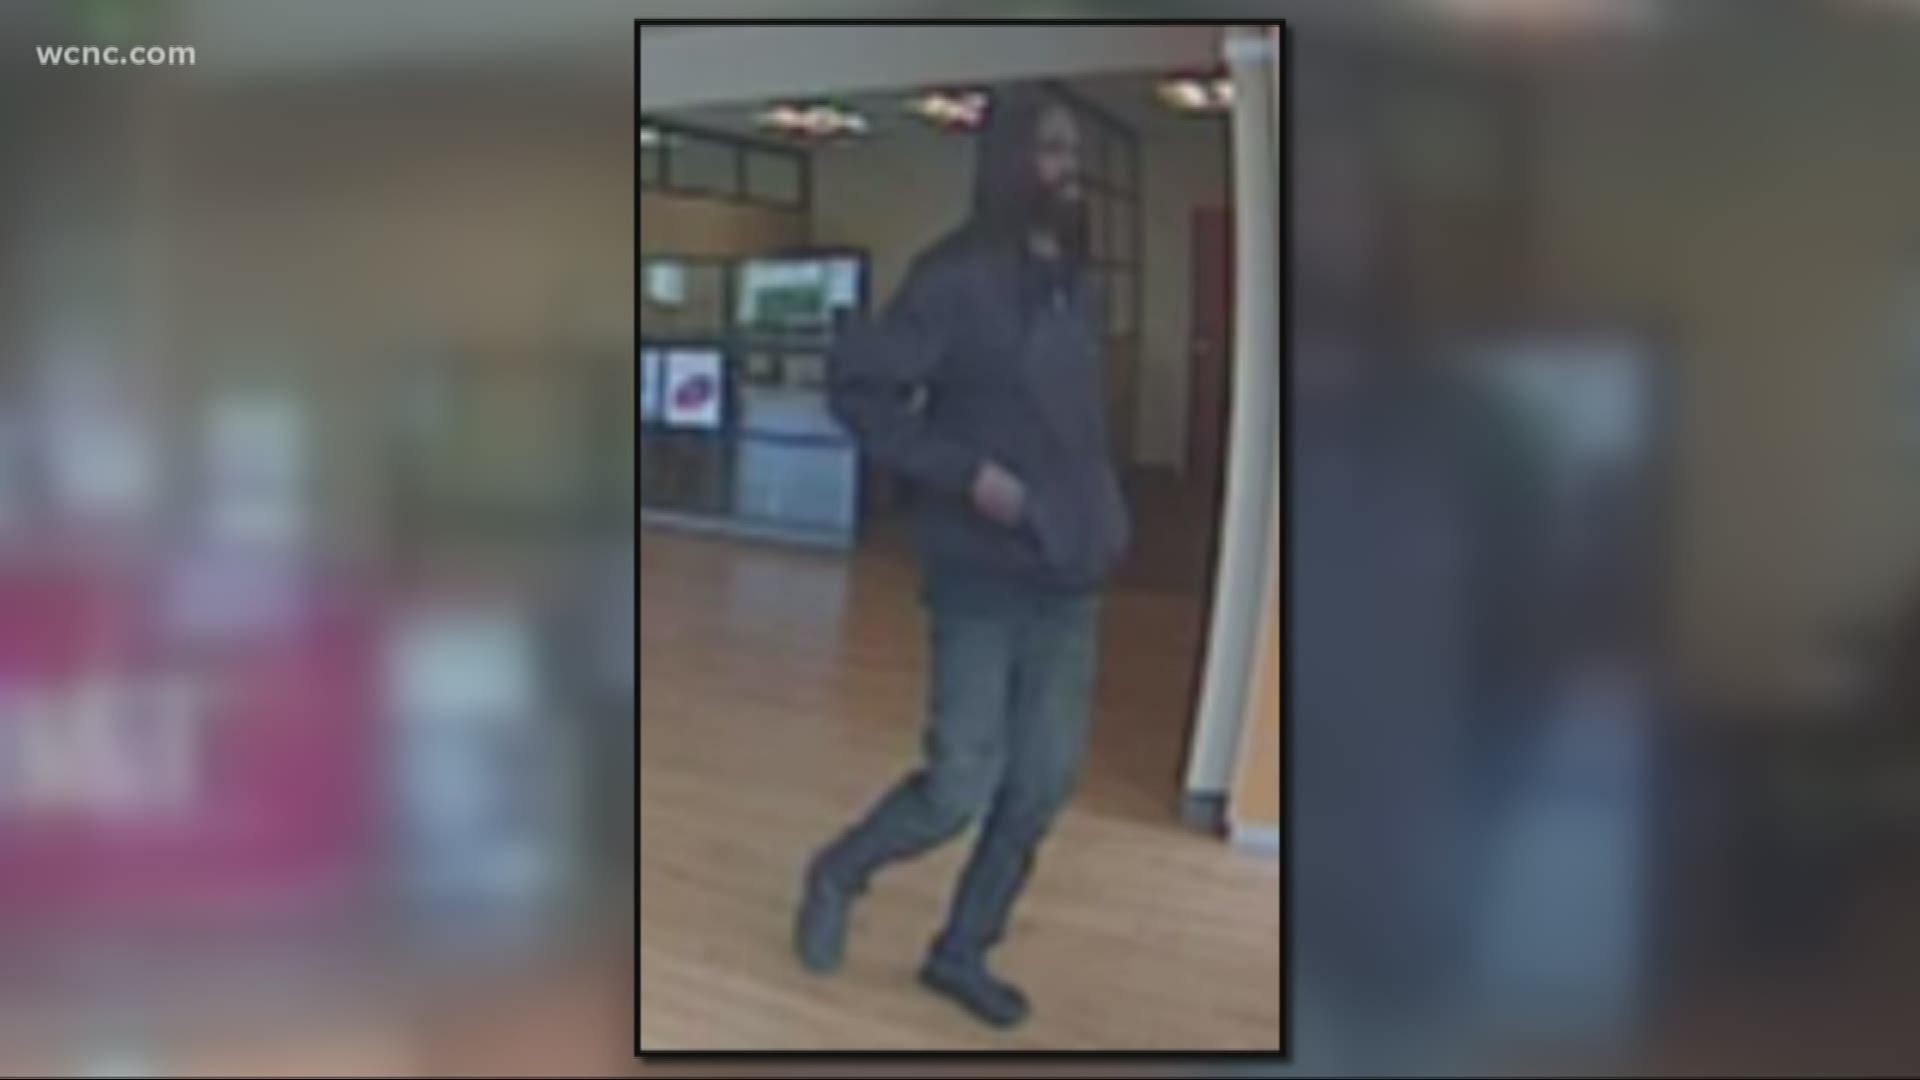 Deputies in Cabarrus County are asking for the public's help identifying the suspect in a robbery at the BB&T bank in Harrisburg.